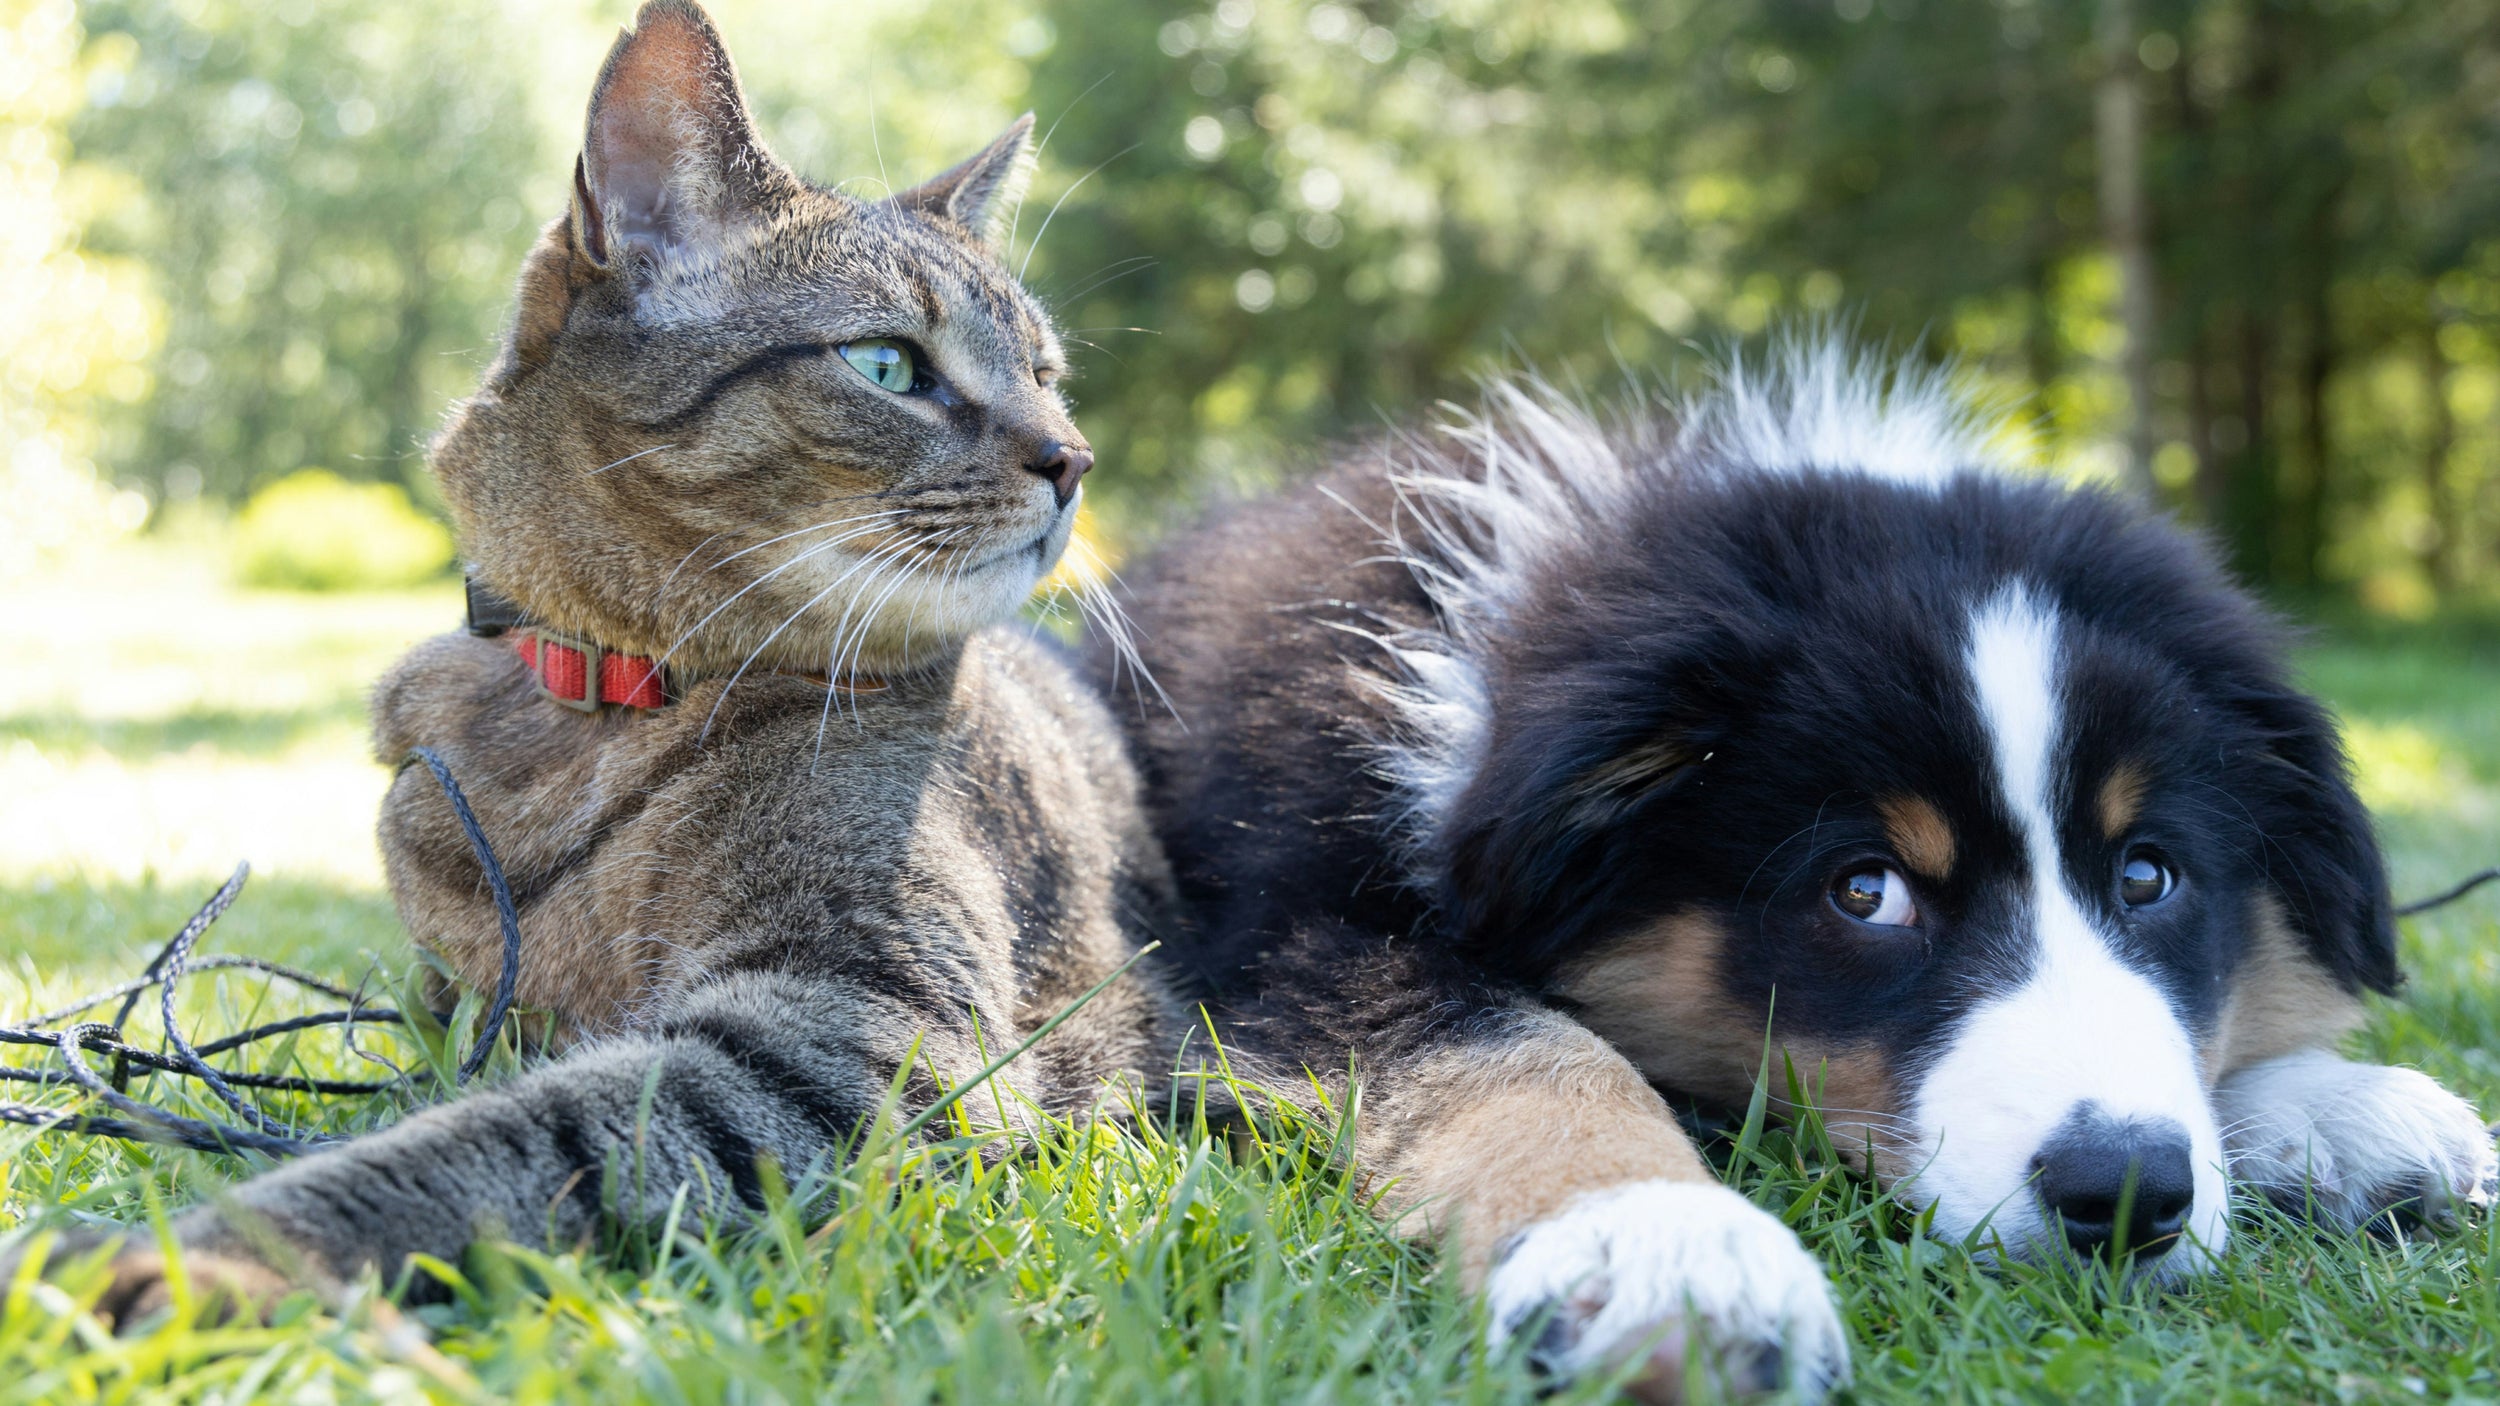 A dog and cat lying in the grass together